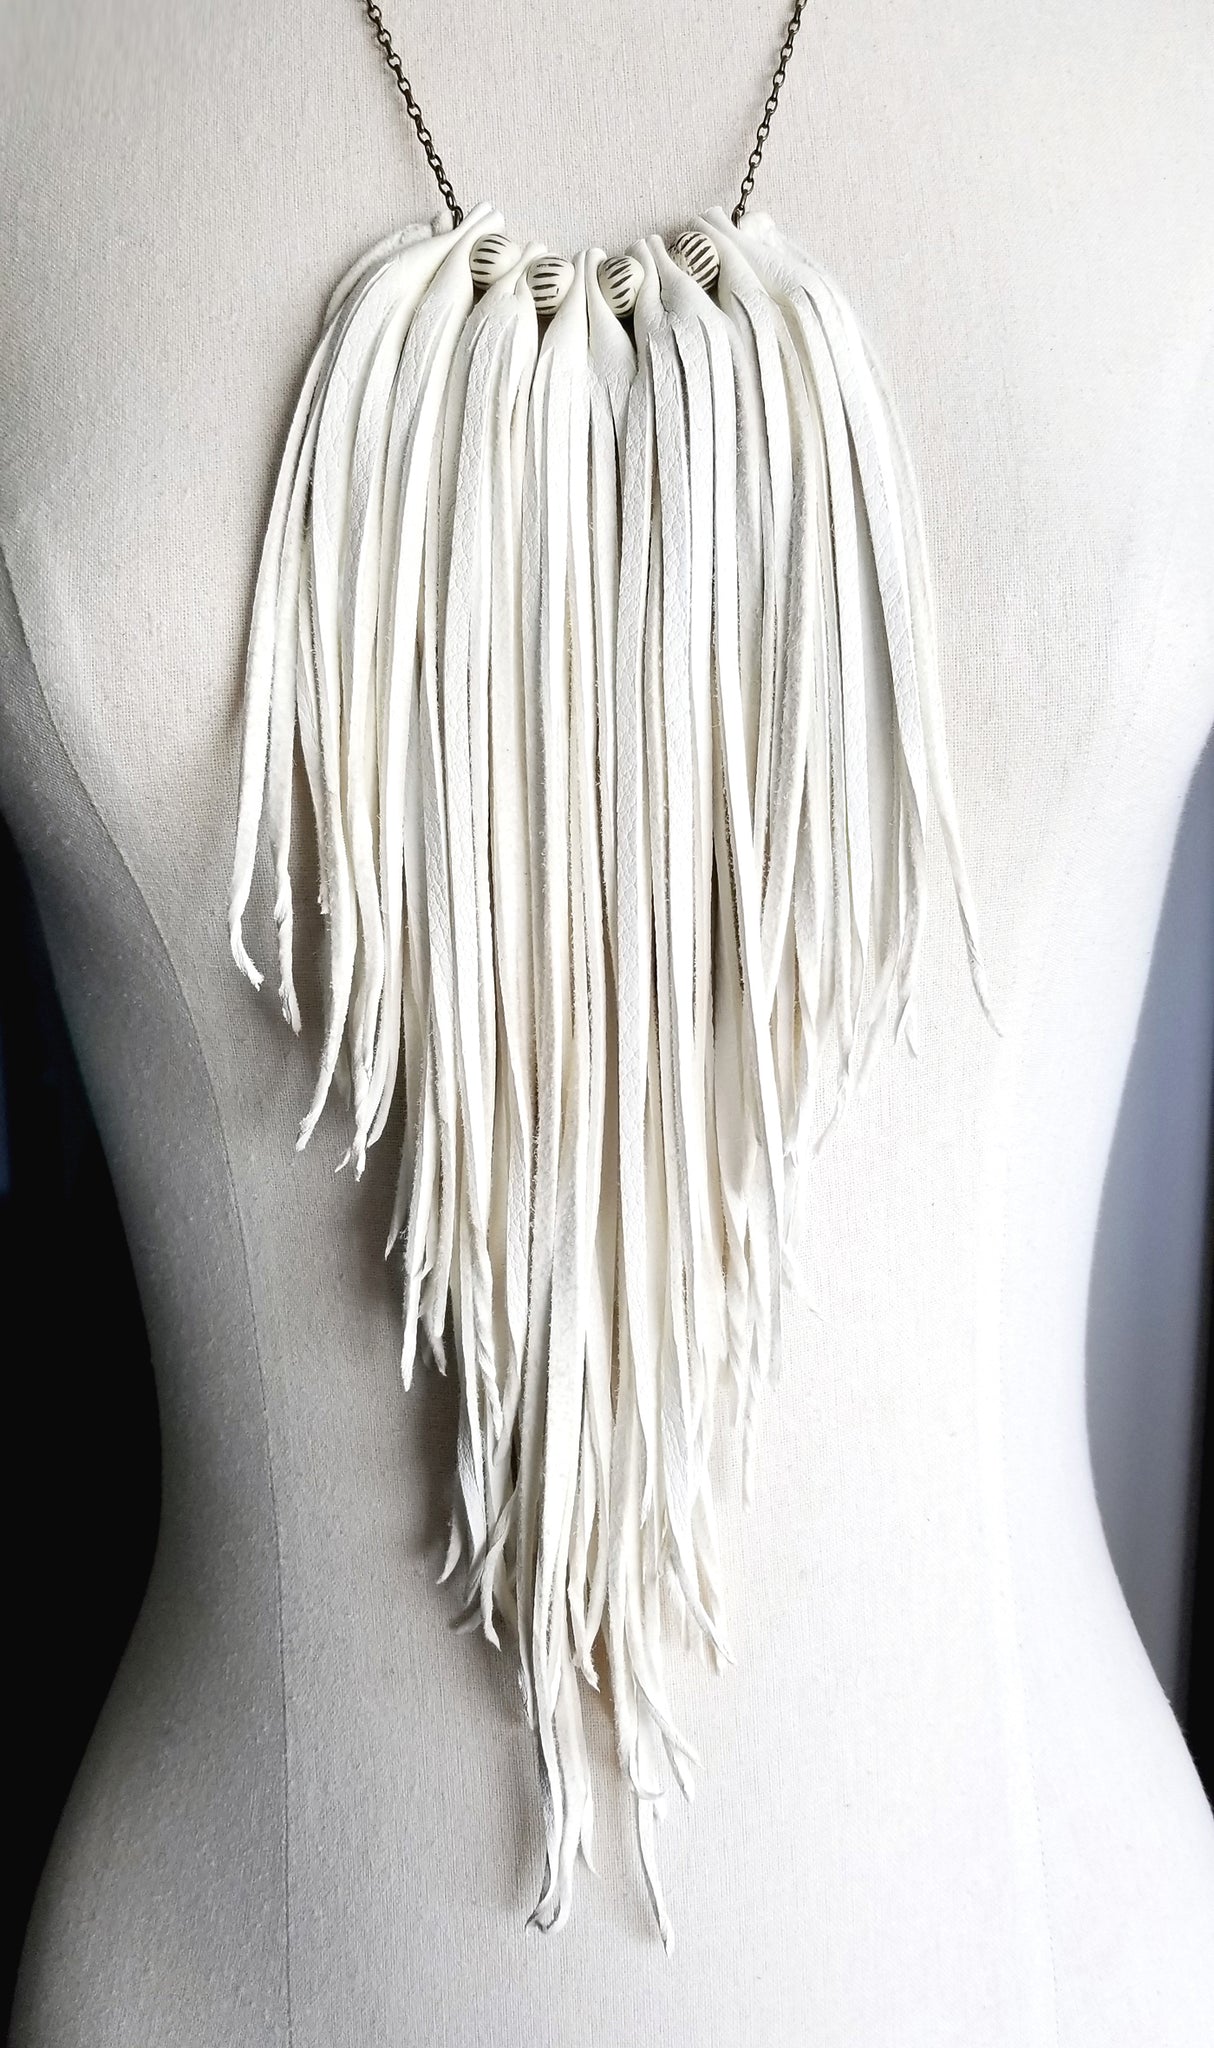 Badu Deerskin Leather Fringe Necklace, cable chain, in Mayonnaise Deerskin Leather